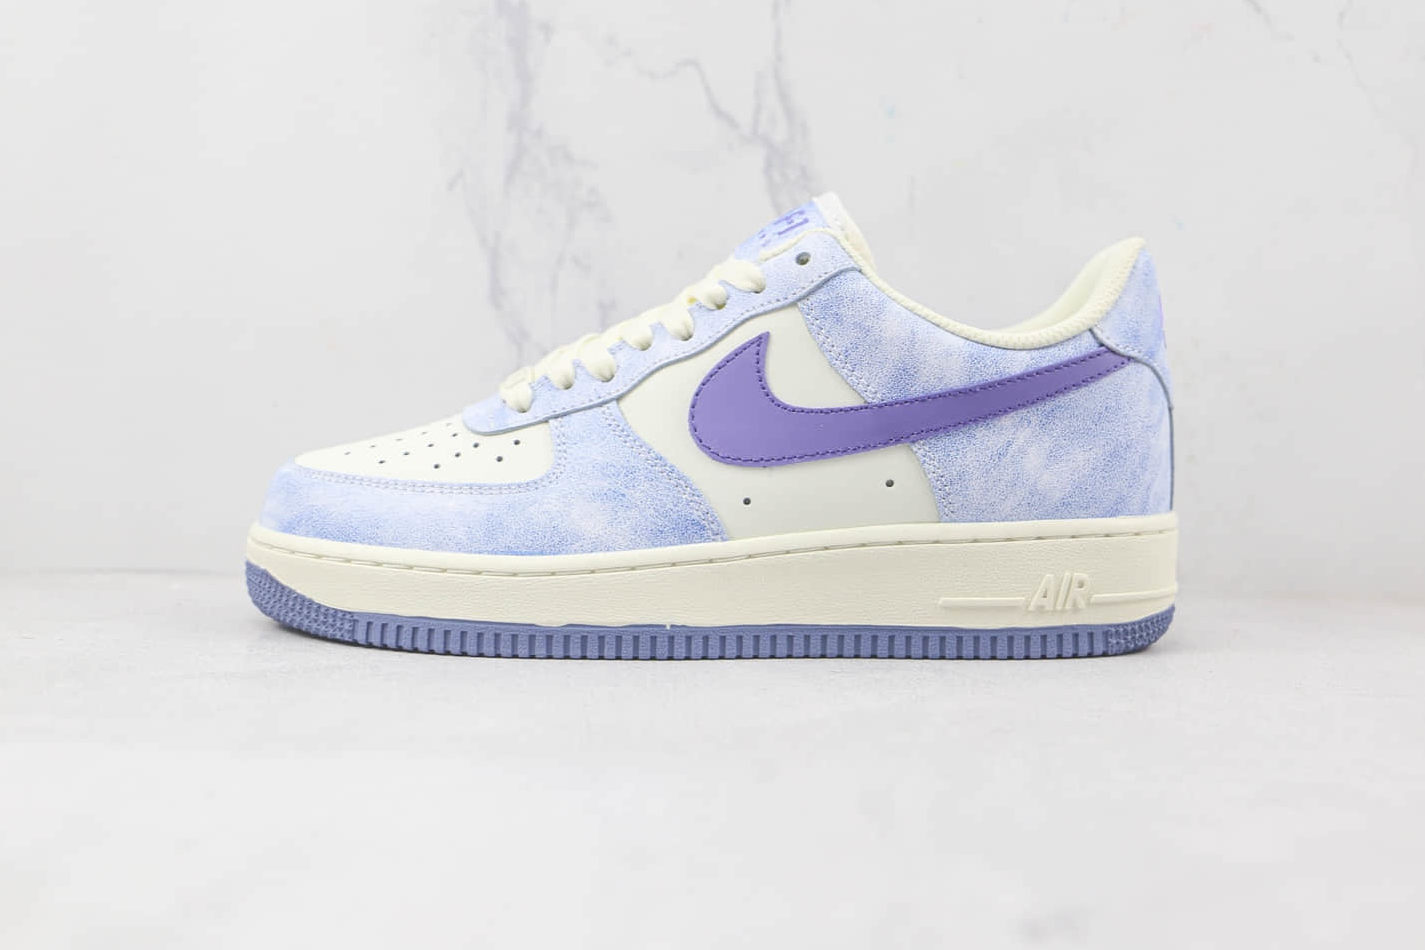 Nike Air Force 1 07 Low Light Purple White GK9978-022 - Classic Style and Comfort at Its Best